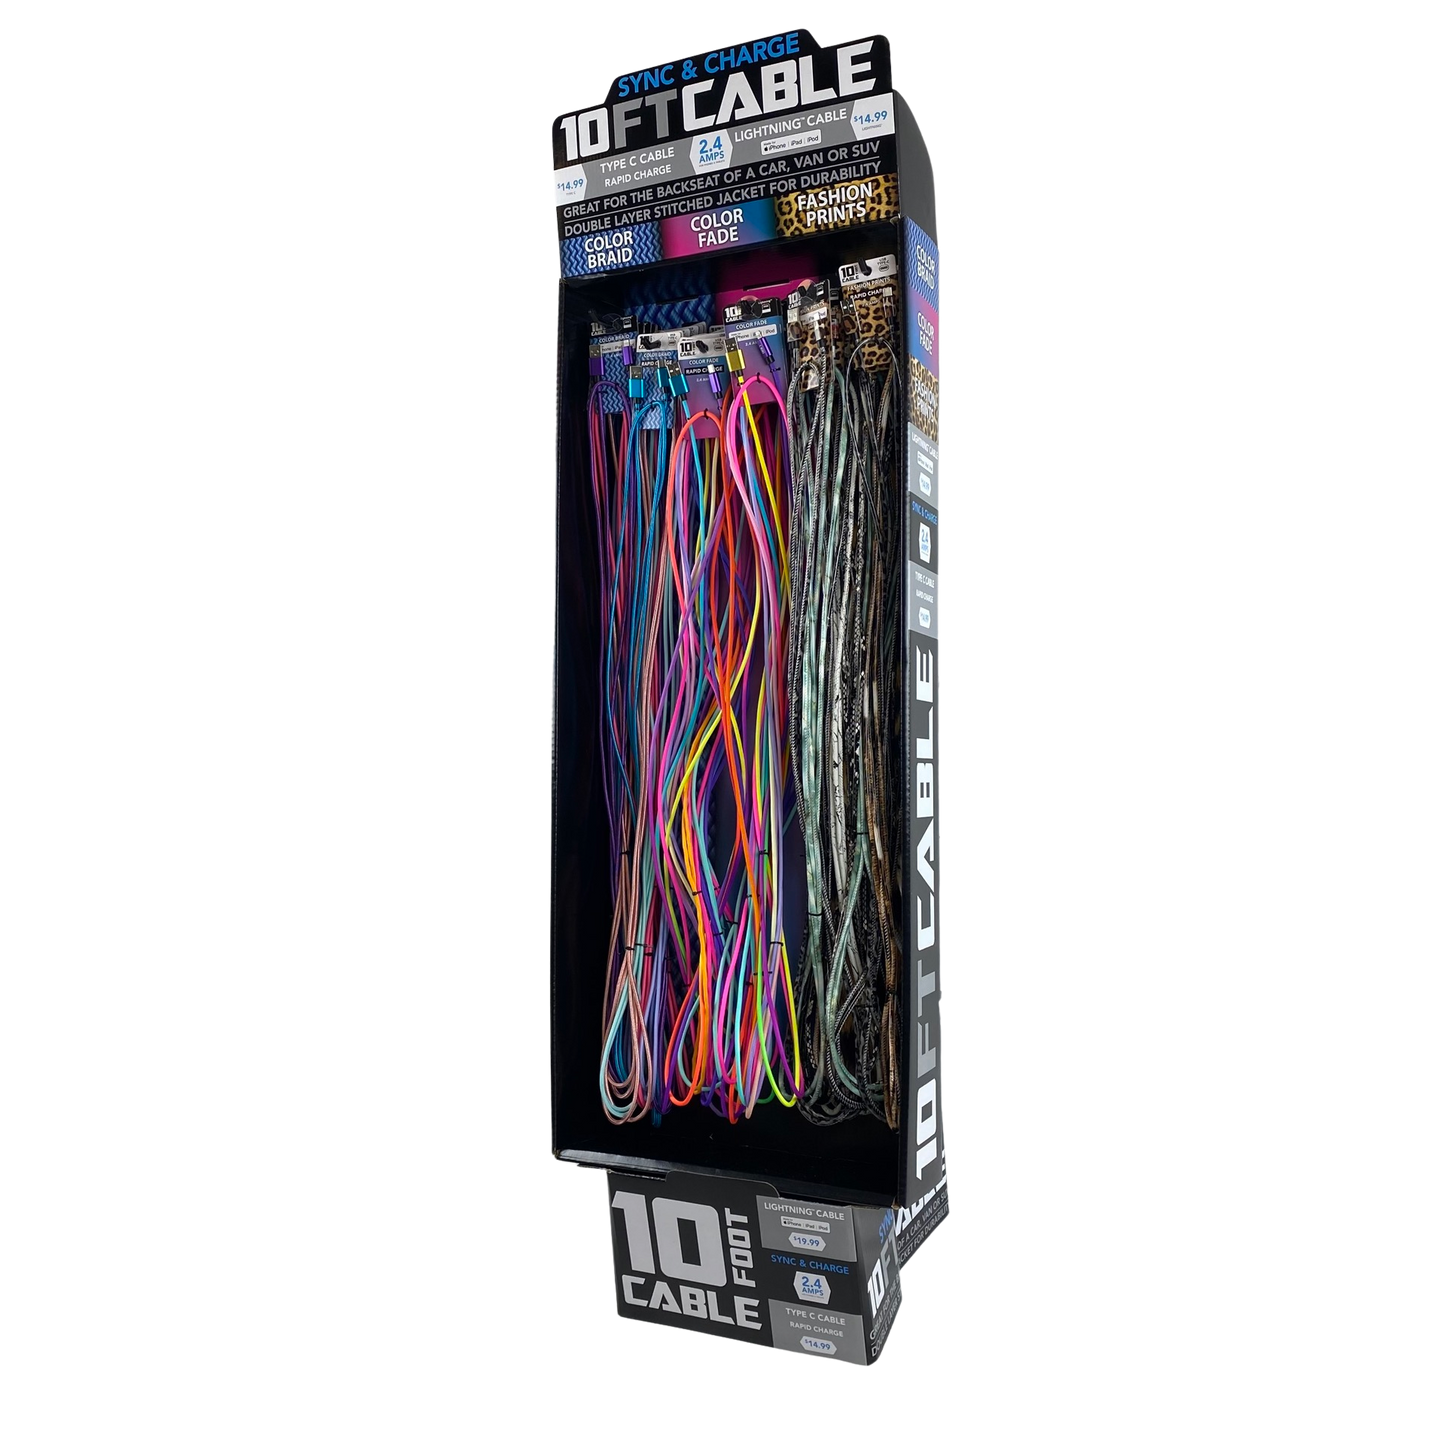 ITEM NUMBER 088385 10FT BRAIDED CABLES FLOOR DISPLAY 36 PIECES PER DISPLAY